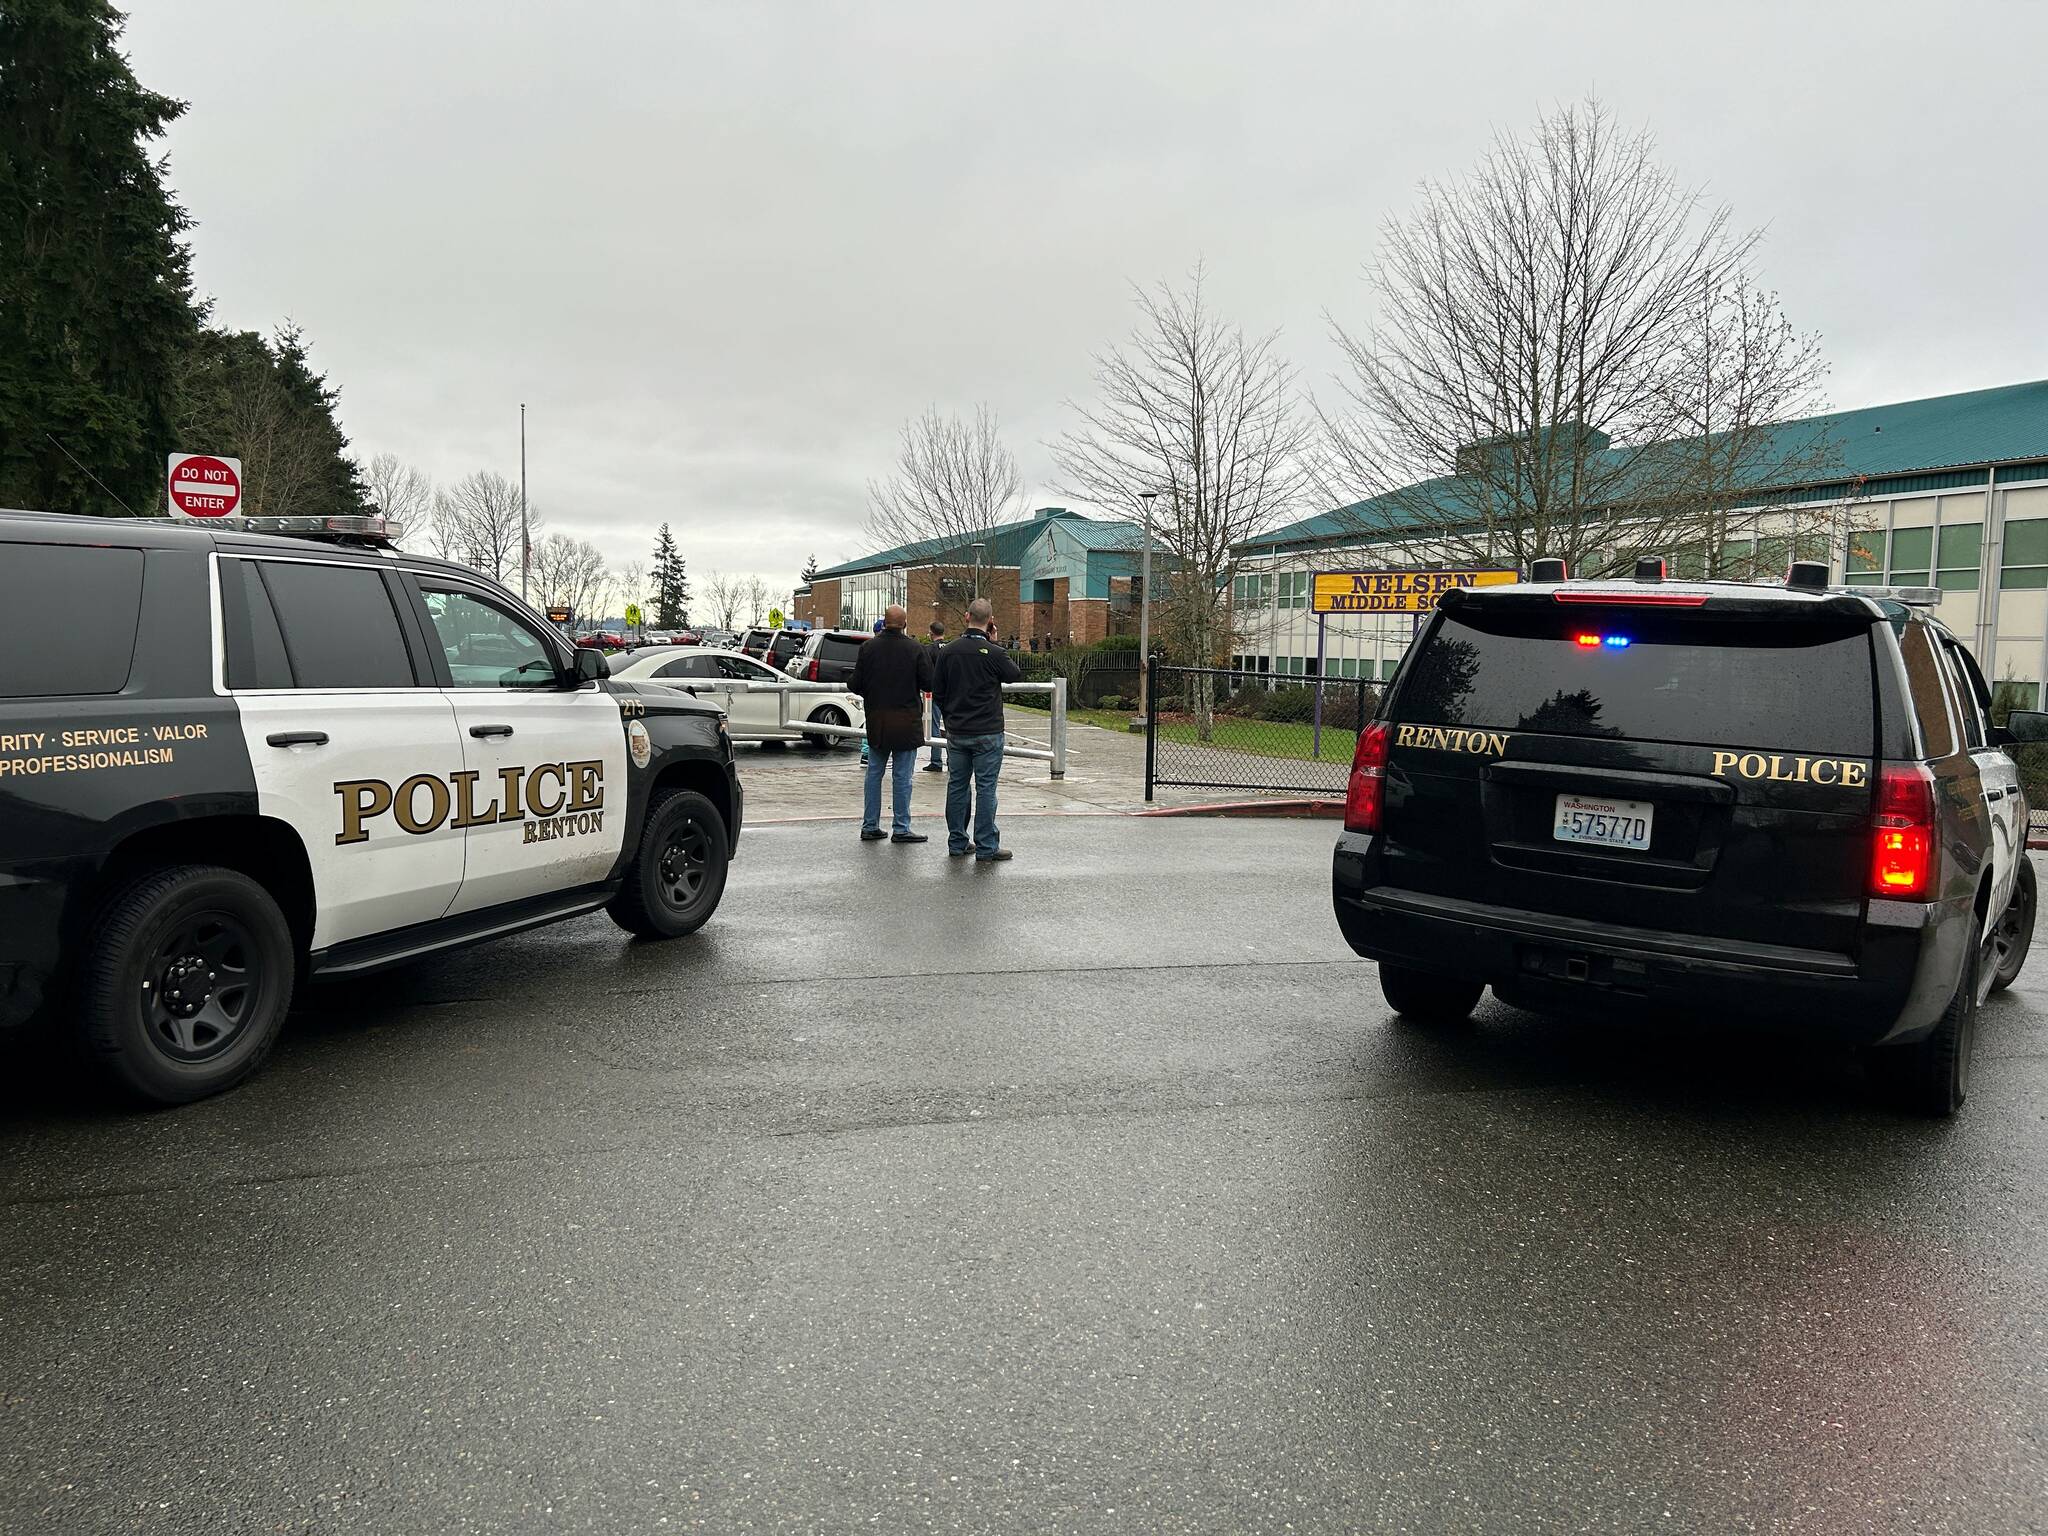 Renton police entered Nelsen Middle School on Dec. 14 after a prank phone call alleged there was a firearms threat in the school. (Courtesy of the Renton Police Department.)